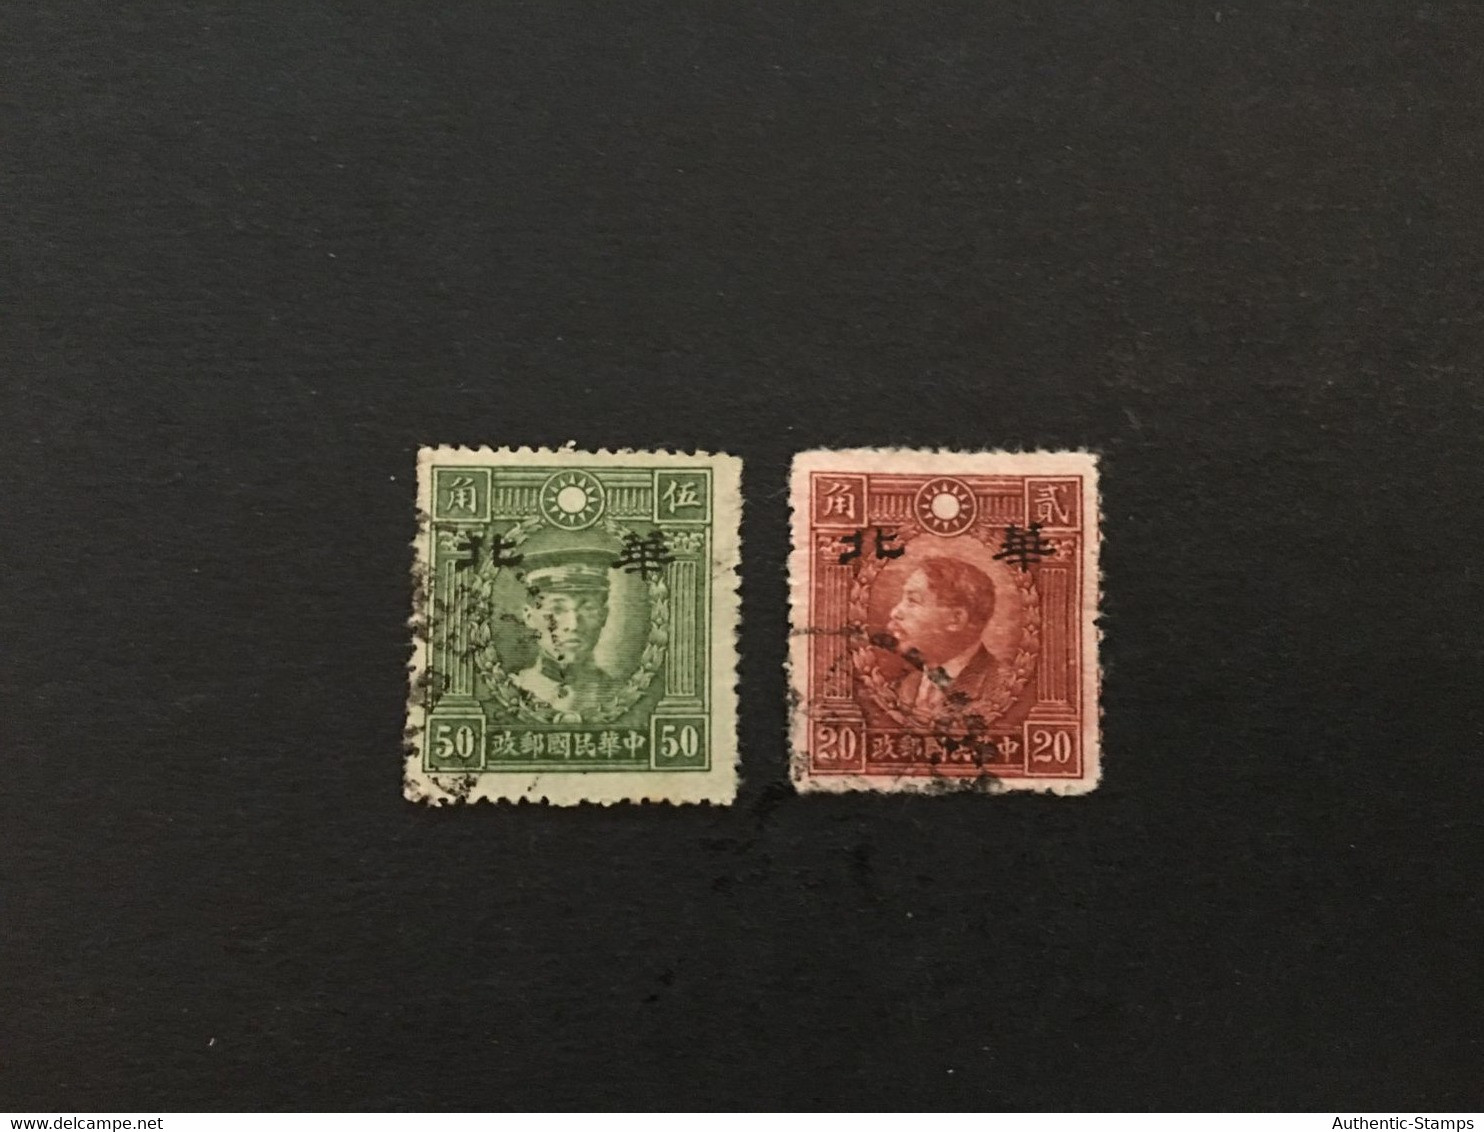 CHINA  STAMP, TIMBRO, STEMPEL, USED, CINA, CHINE, LIST 2792 - 1941-45 Cina Del Nord